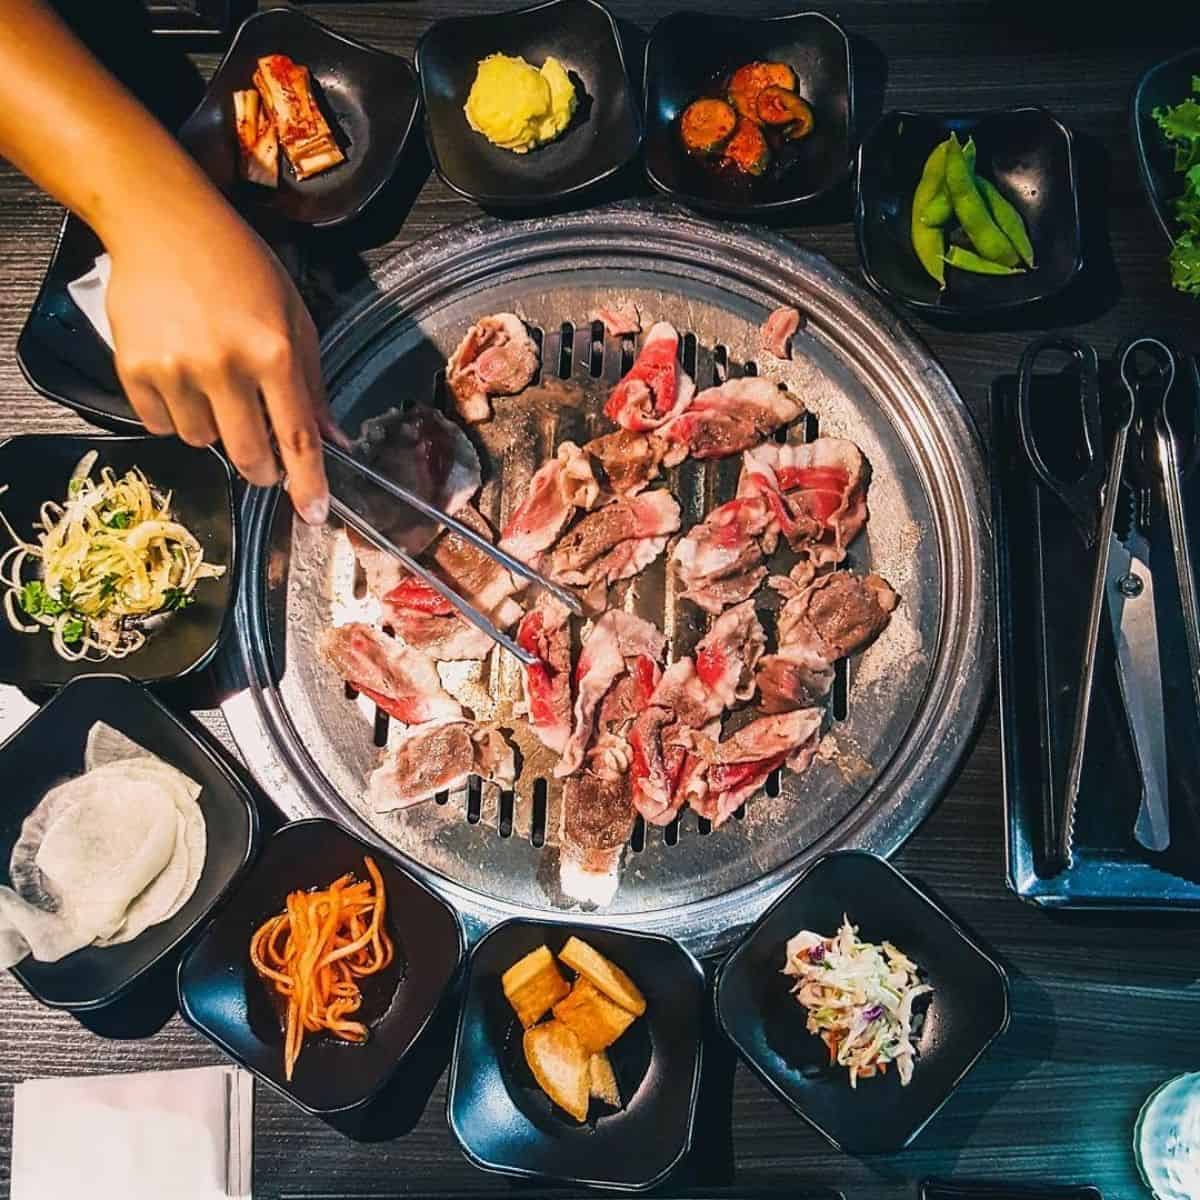 Recipes for KBBQ at home? : r/KoreanFood